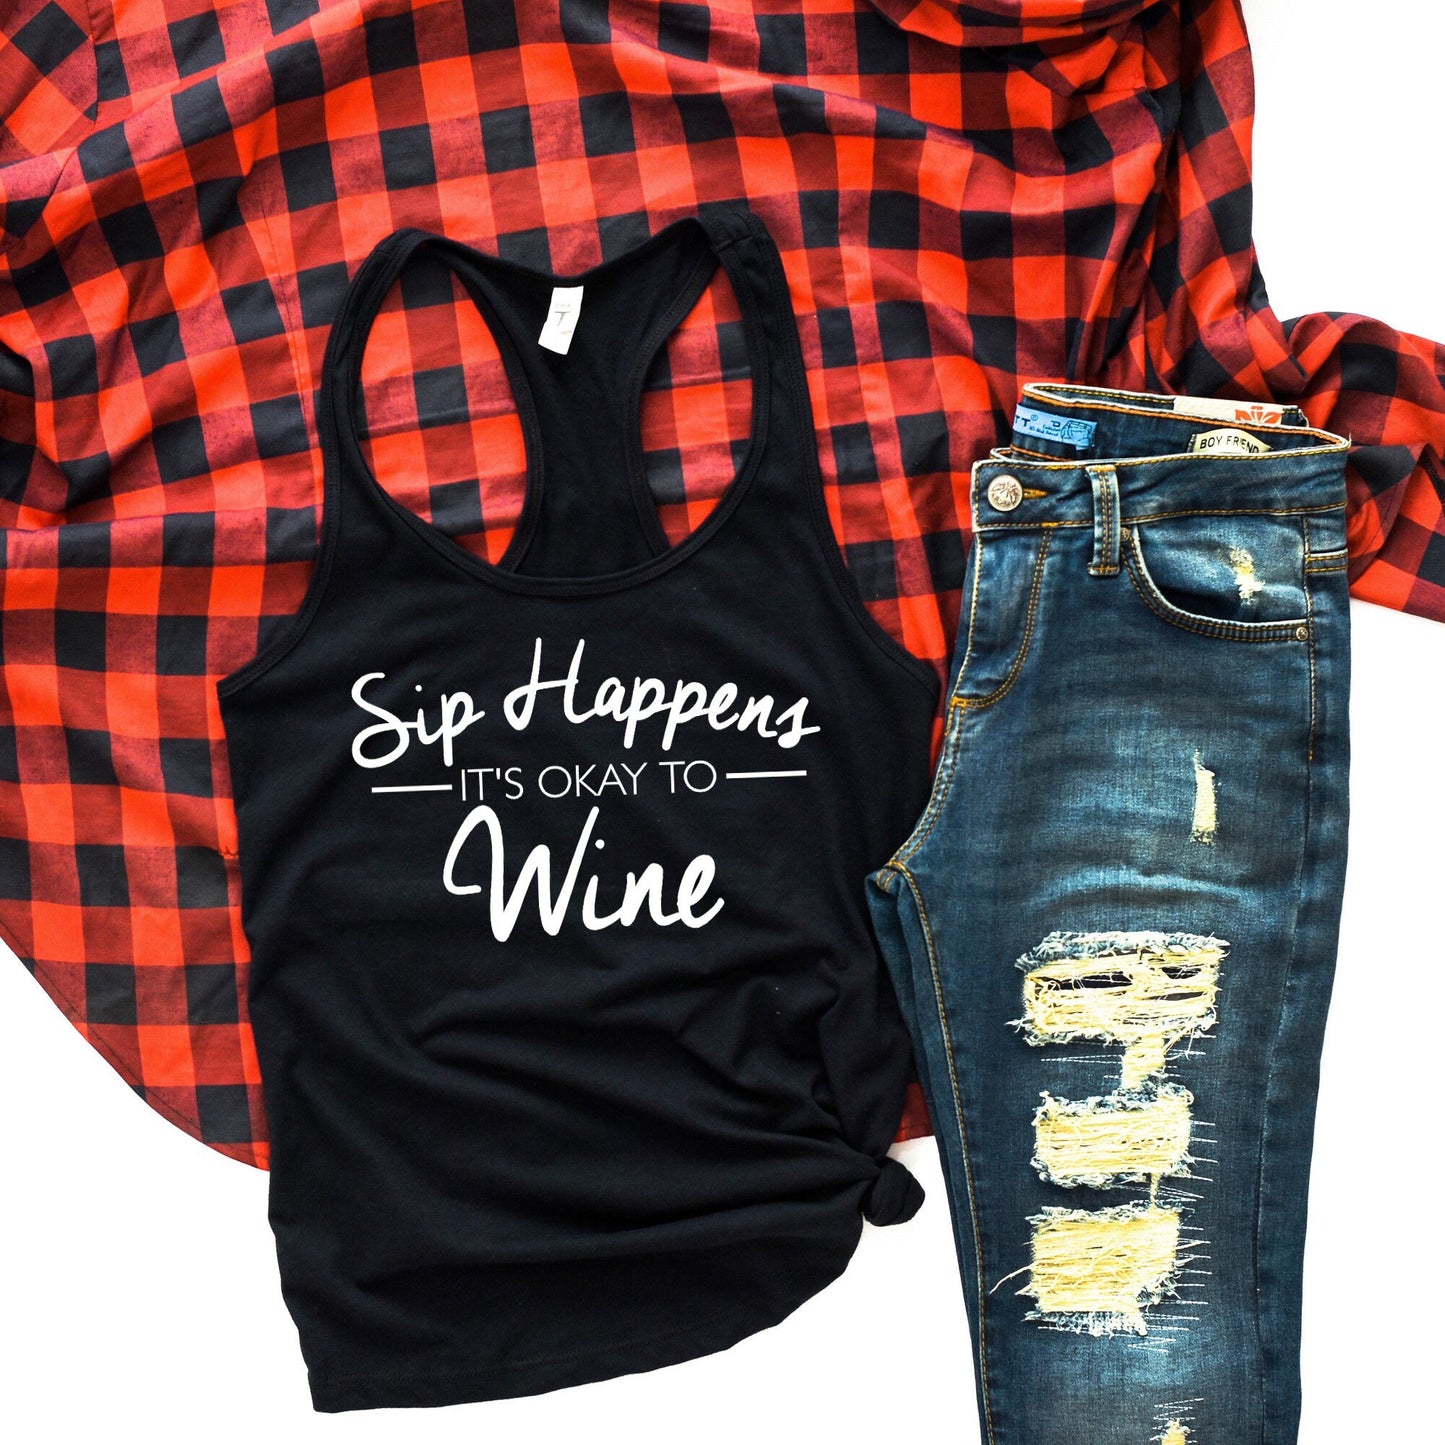 sip happens, it's okay to wine racerback tank top - wine tank top - wine tasting - mom tank top - wine lover gift - funny wine shirt for her